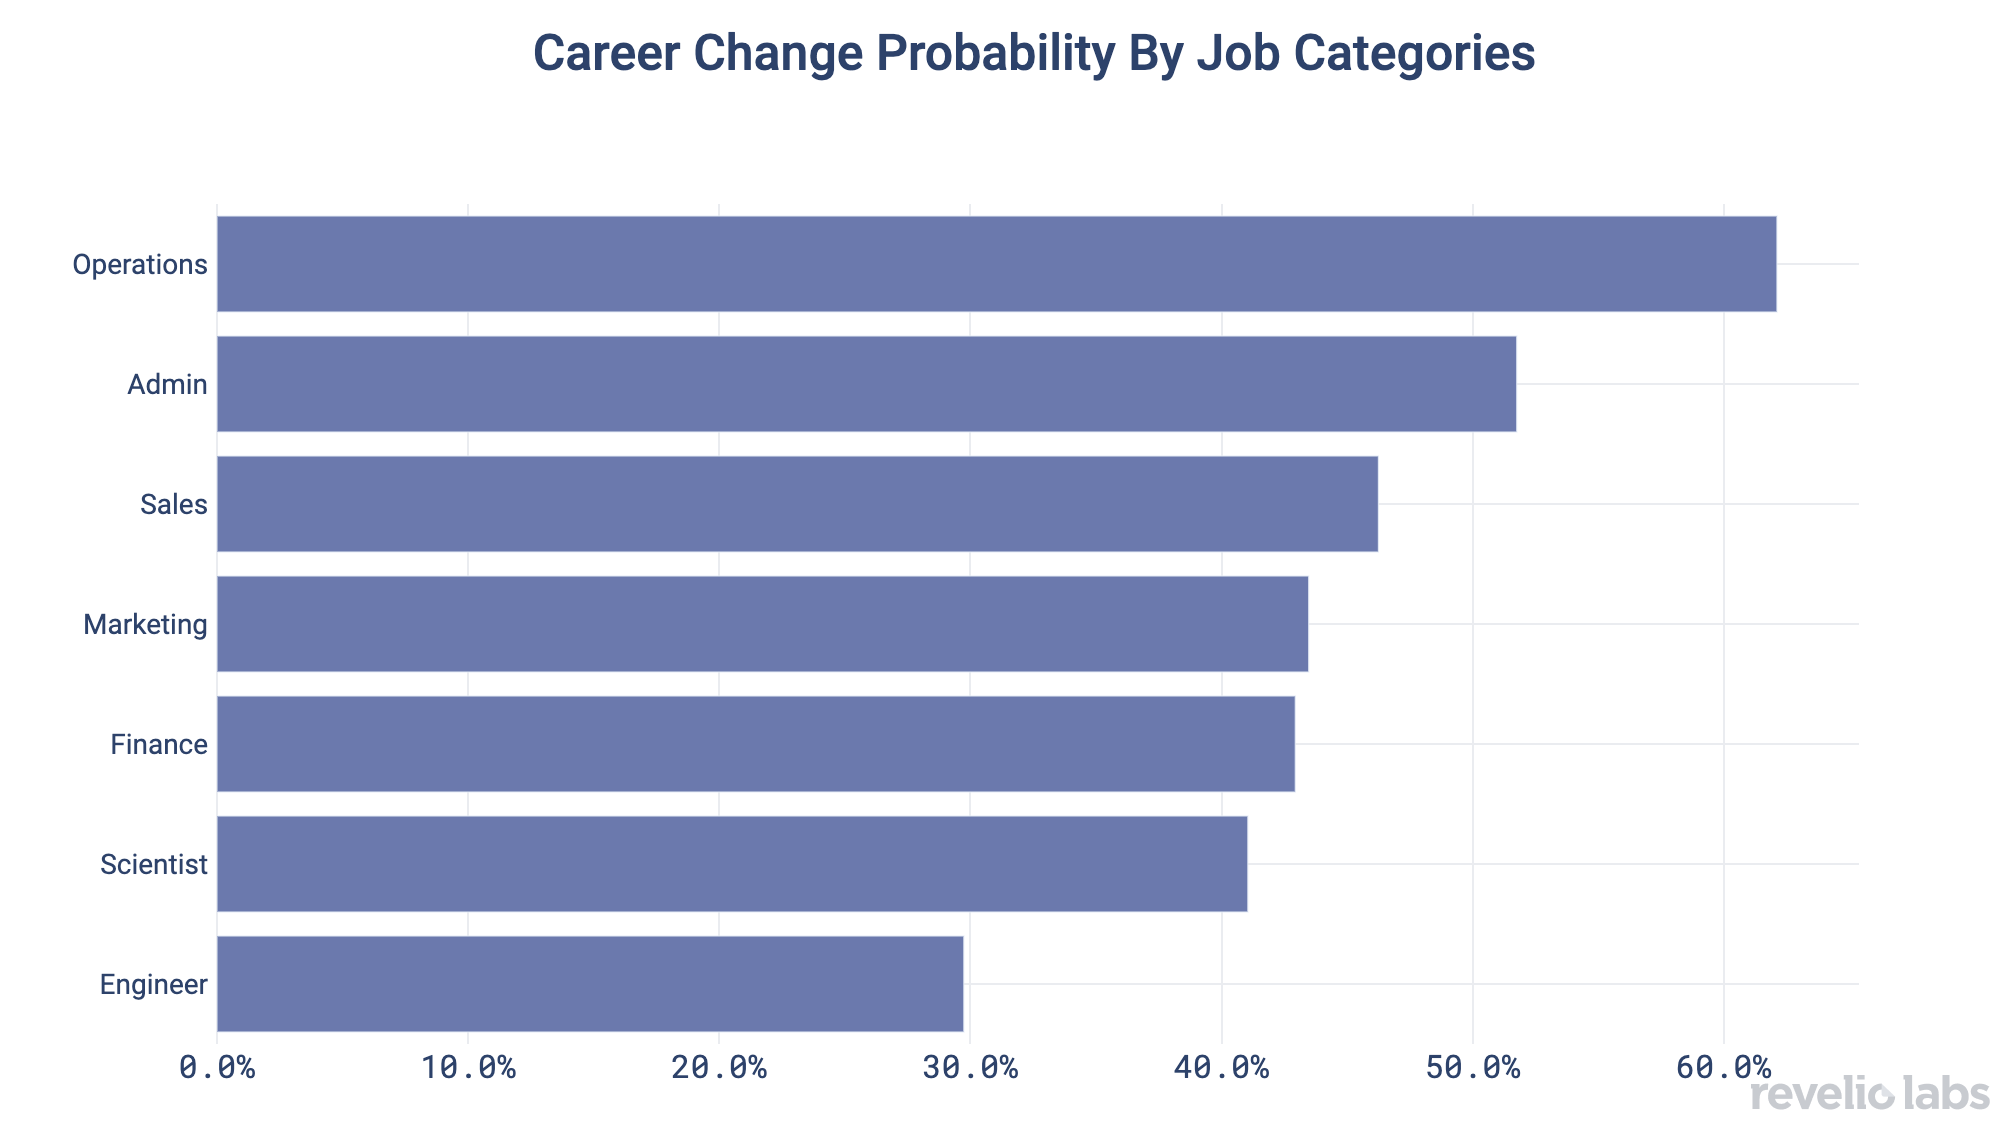 Career Change Probability by Job Categories